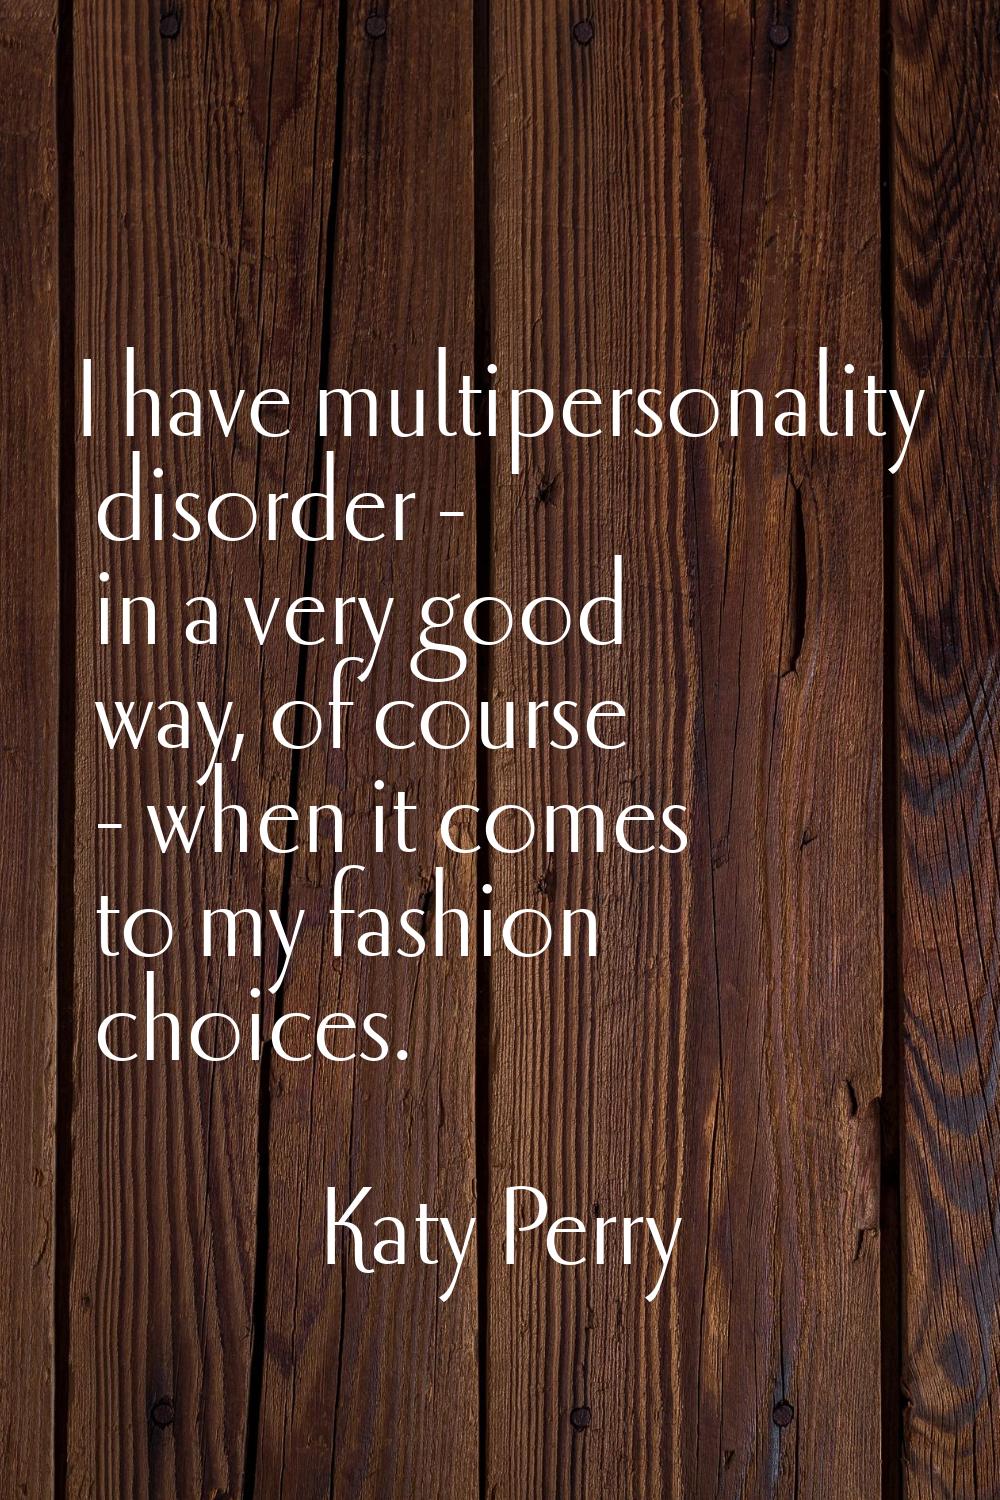 I have multipersonality disorder - in a very good way, of course - when it comes to my fashion choi